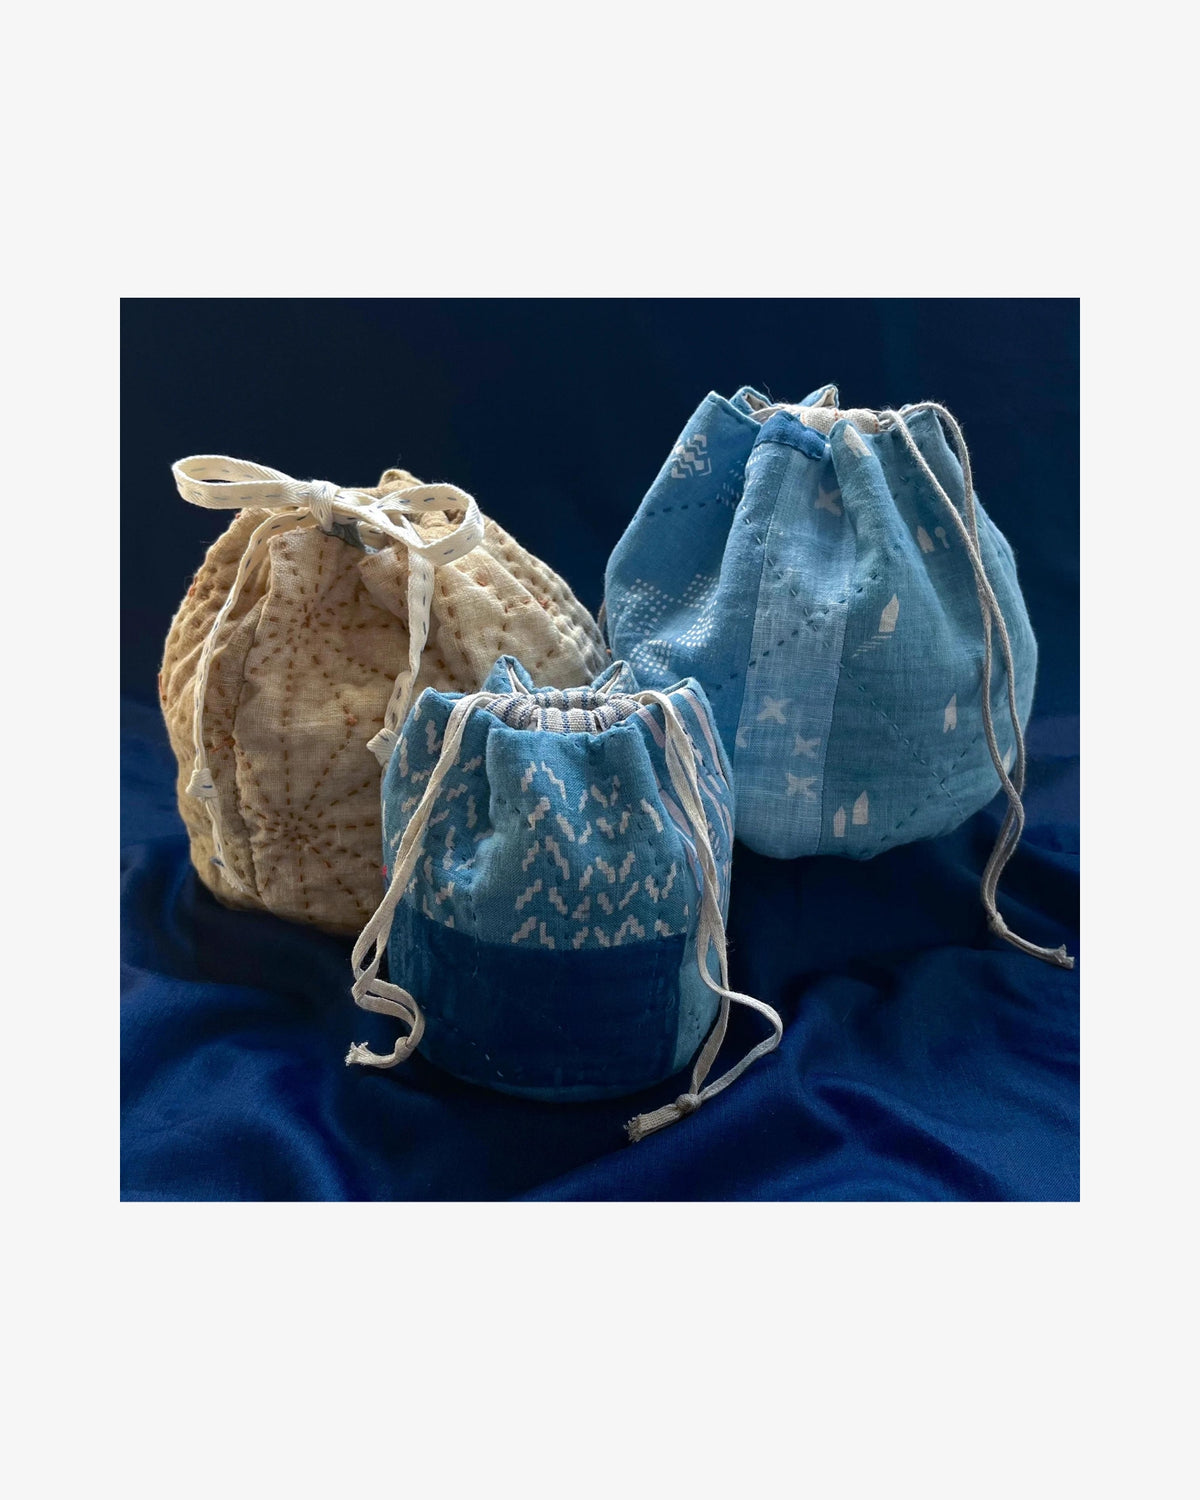 Hand-Stitched Quilted Drawstring Bag Class